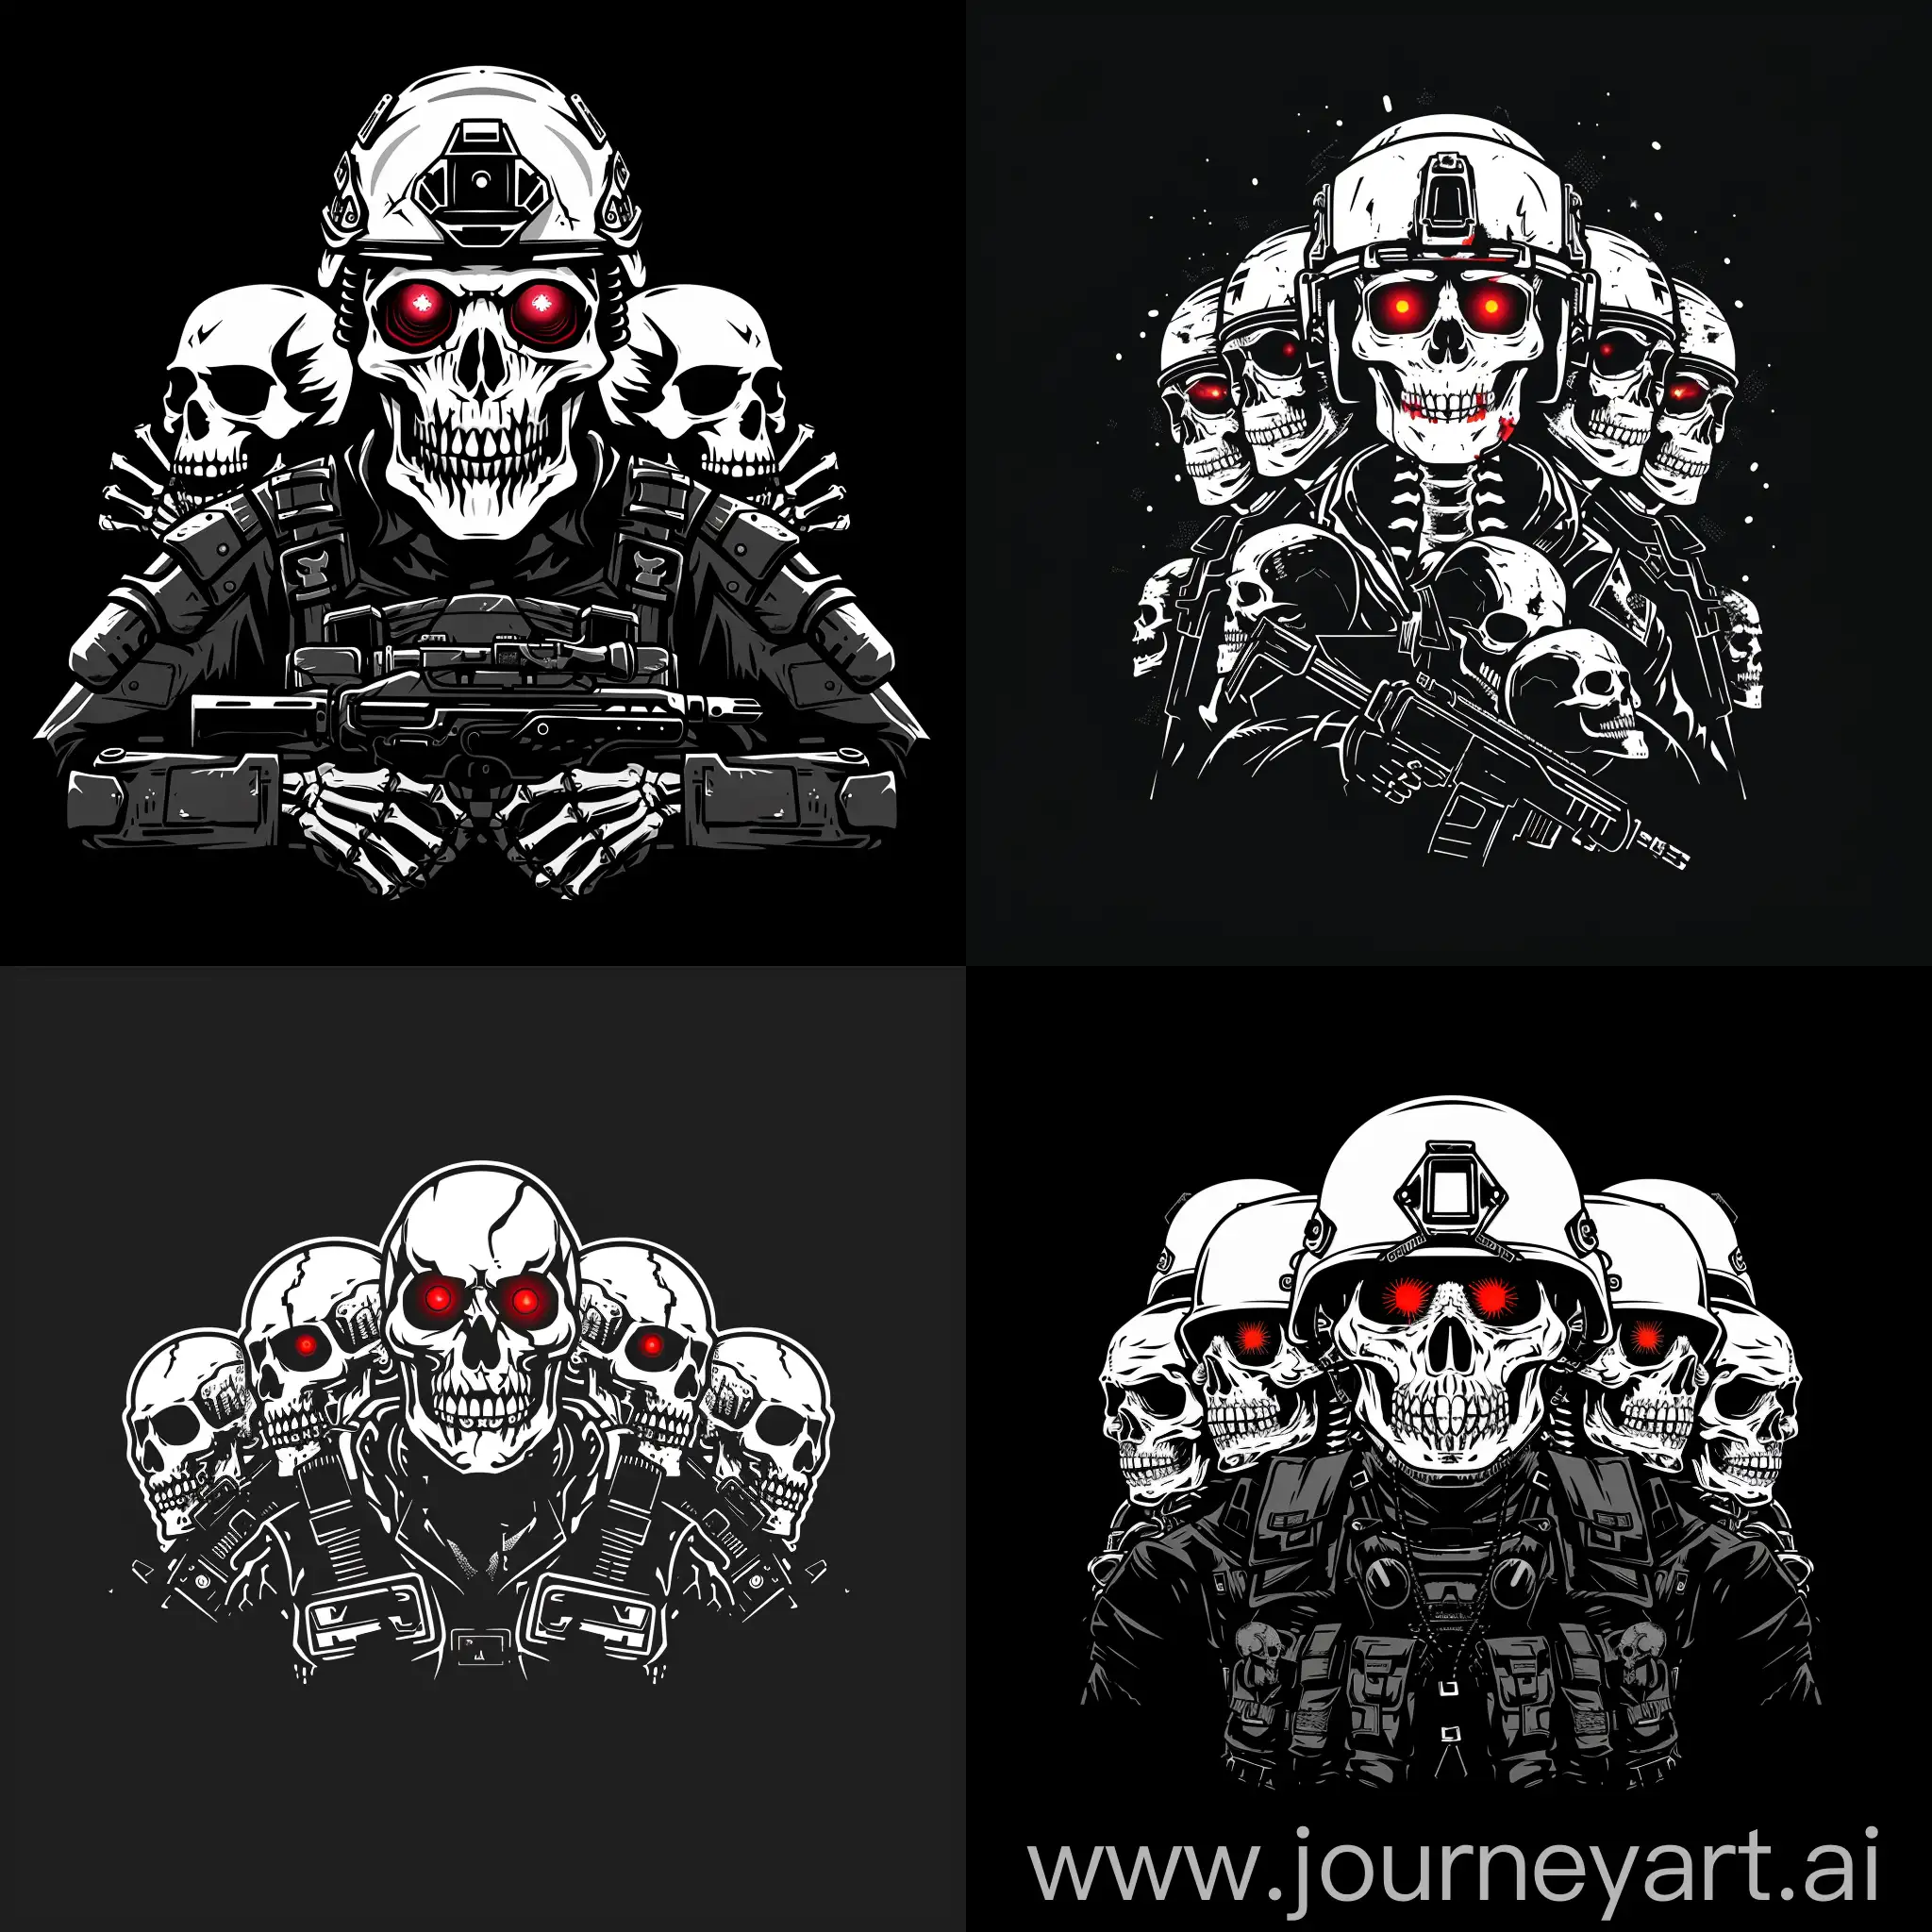 logo of 5 undead soldier look like a skeleton with modern military equipment, minimalism, glowing red eyes, skulls, black and white, black background